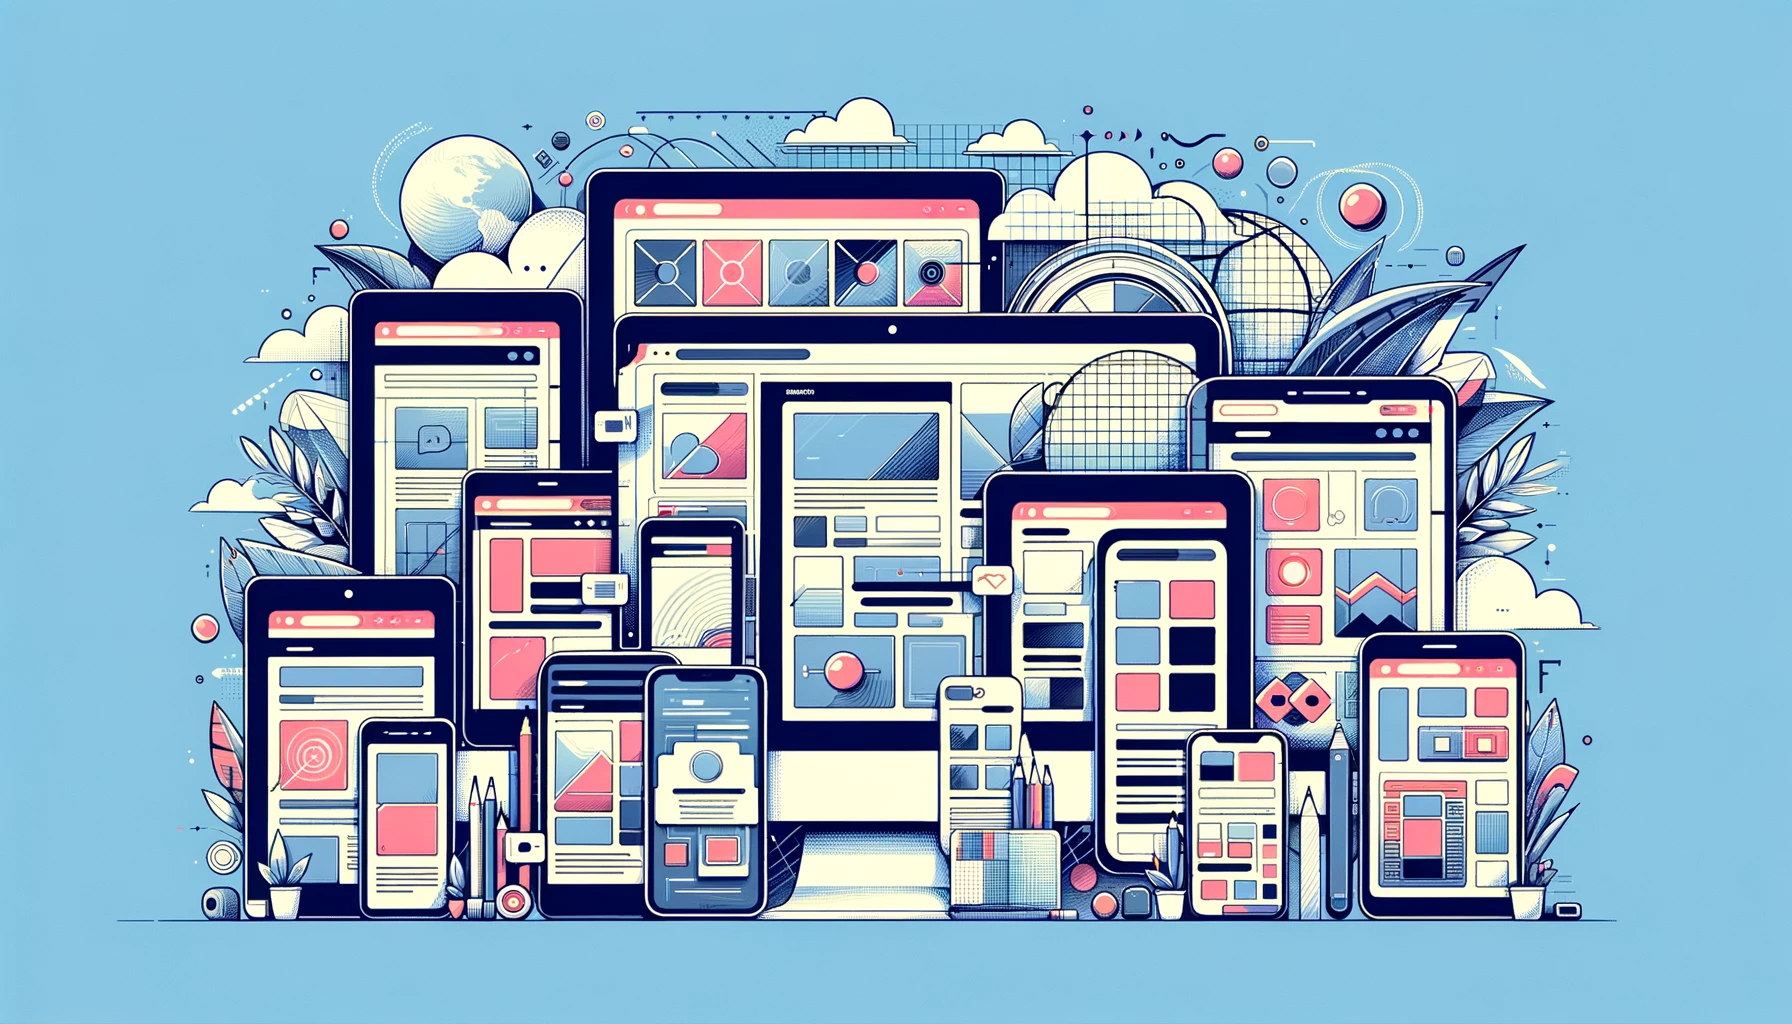 Collection-of-Devices-Showcasing-Responsive-Web-Design-Adaptable-Screens-User-Interface-Elements-Blue-Toned-Illustration-Design-Versatility